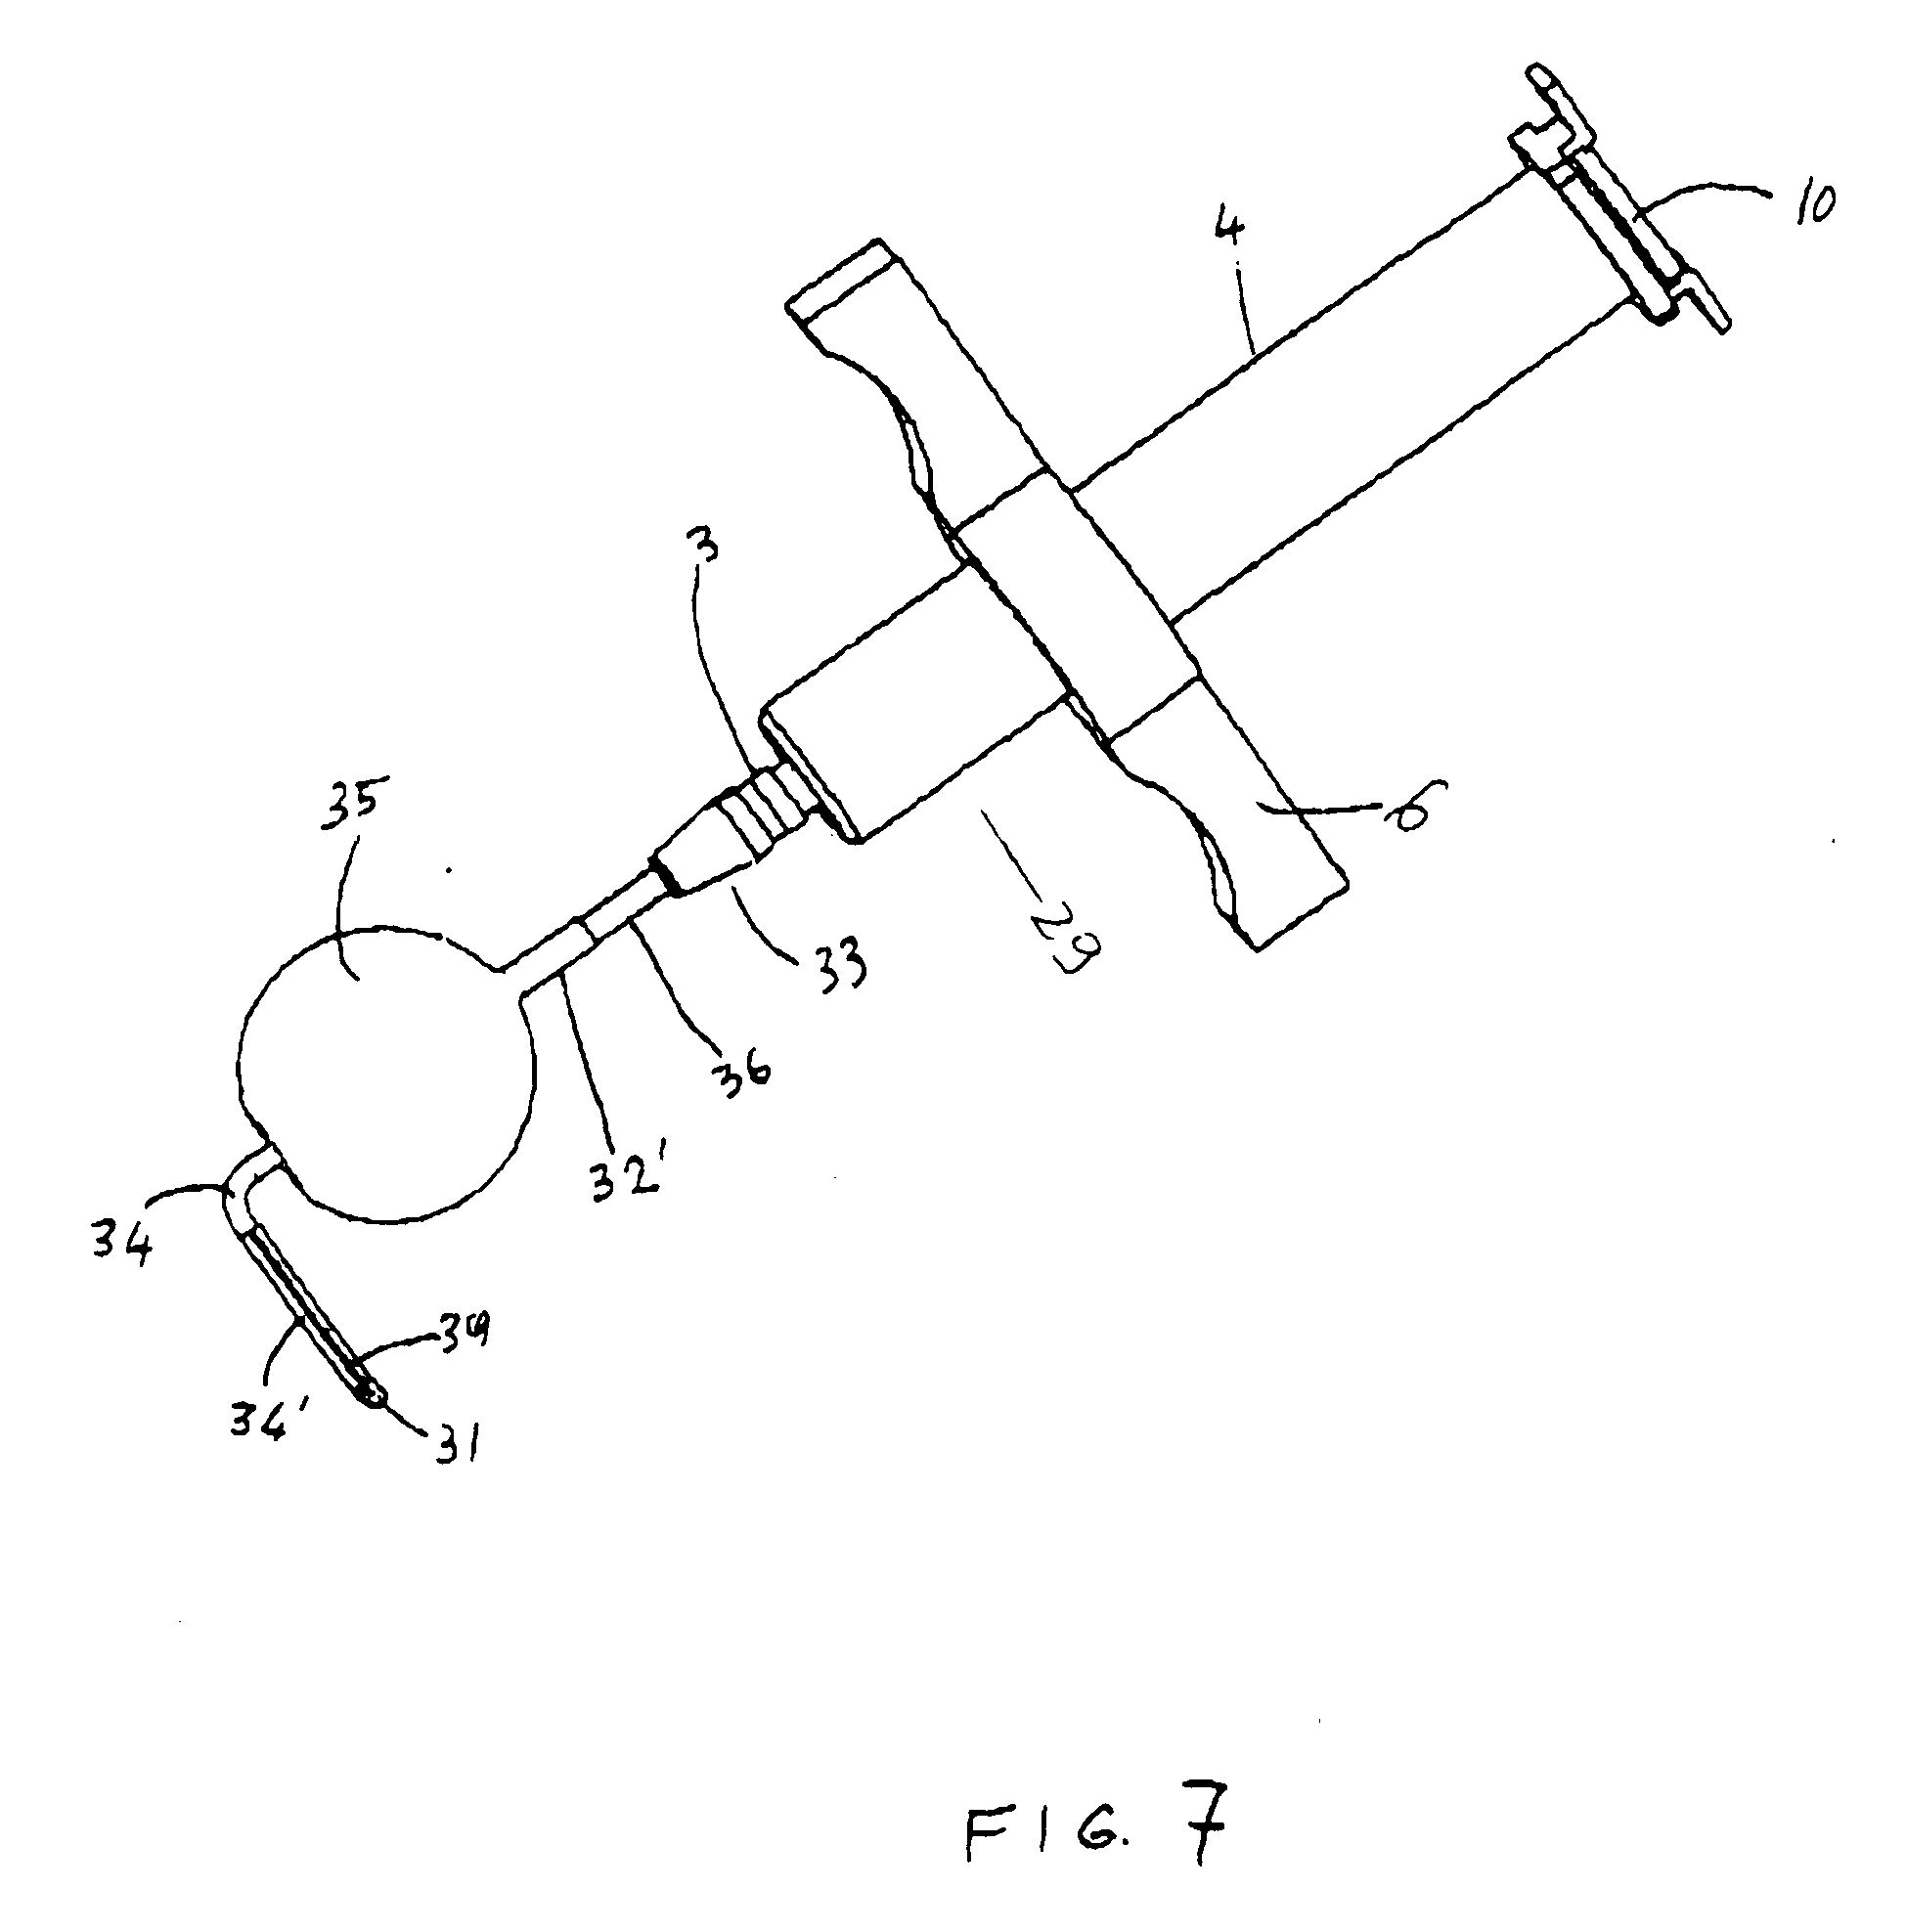 Infra-epidermic subcision device for blunt dissection of sub-epidermic tissues